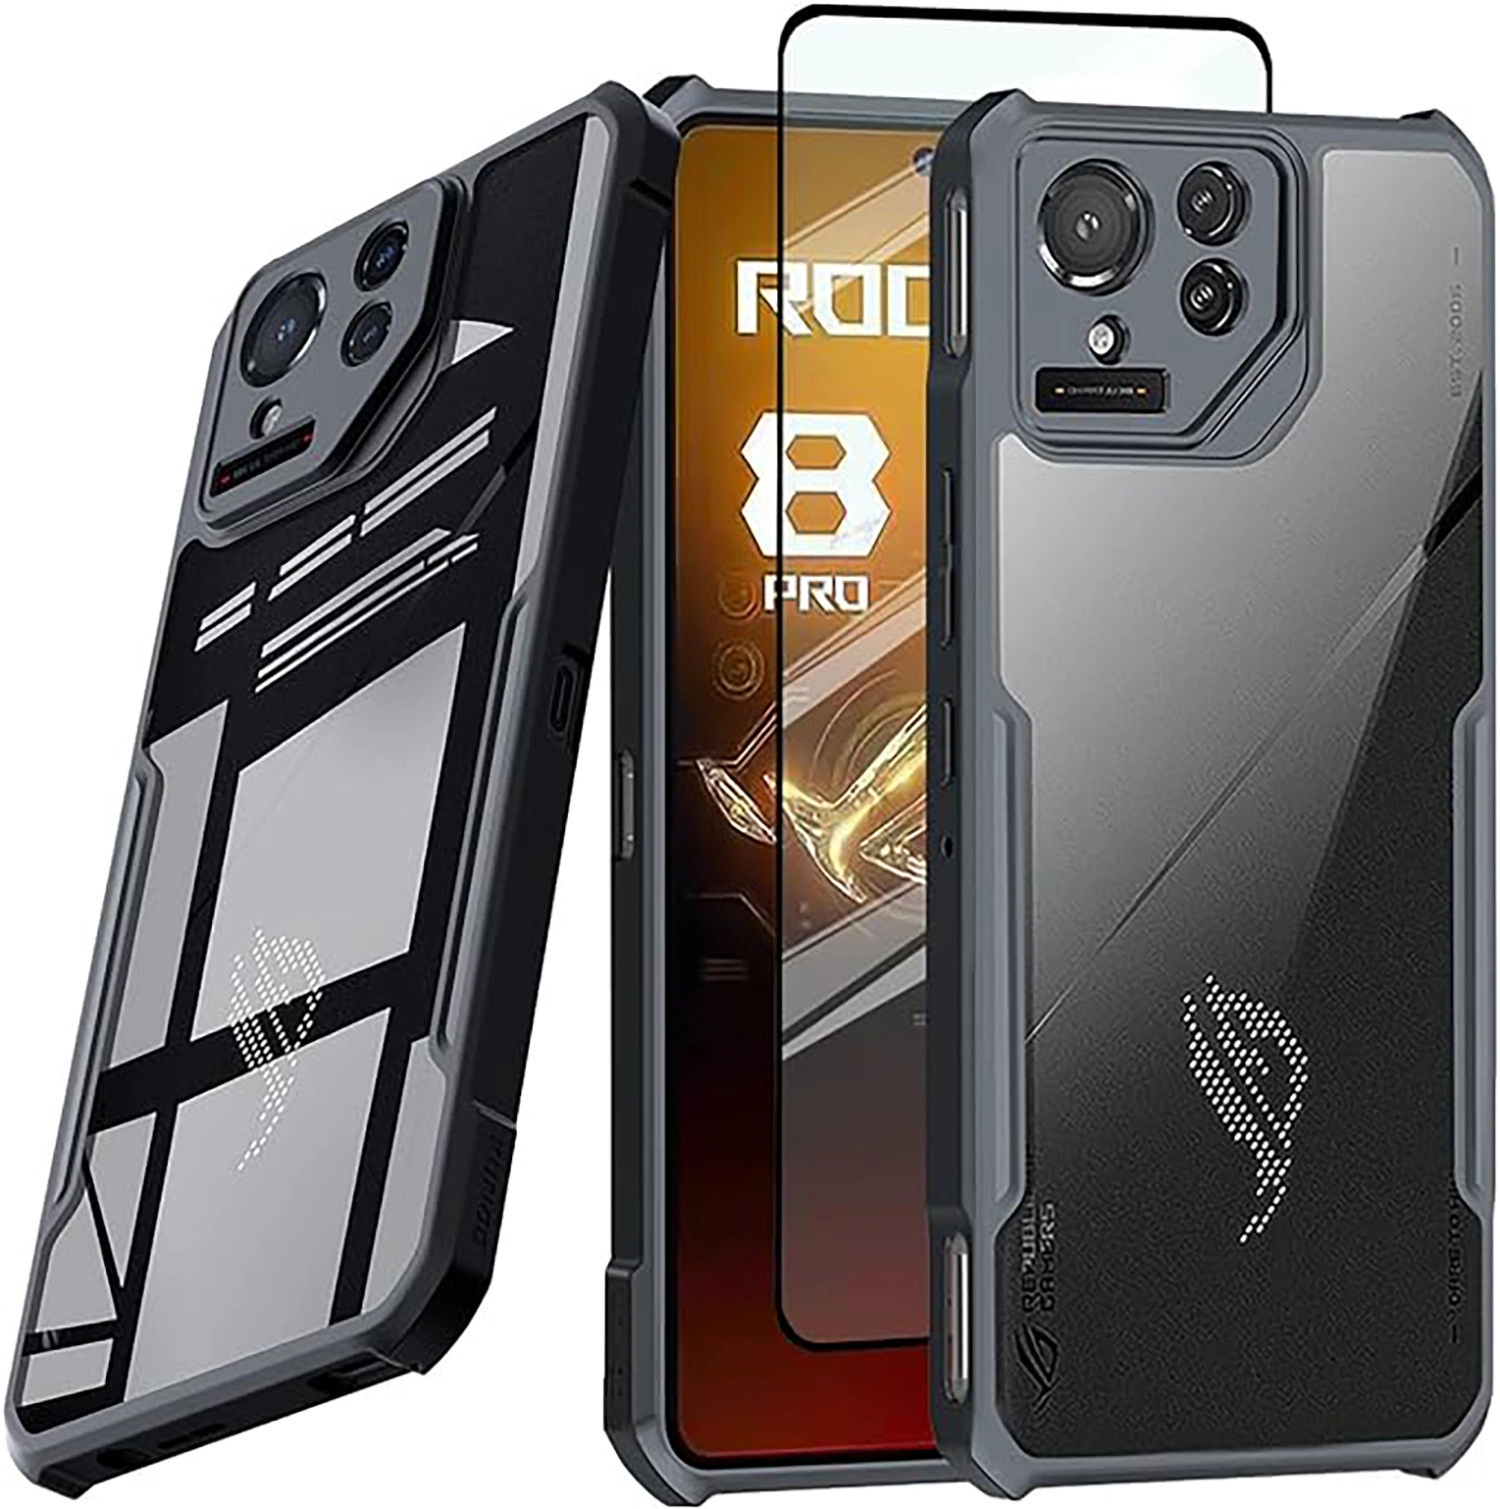 op-lung-asus-rog-phone-8-pro-acrylic